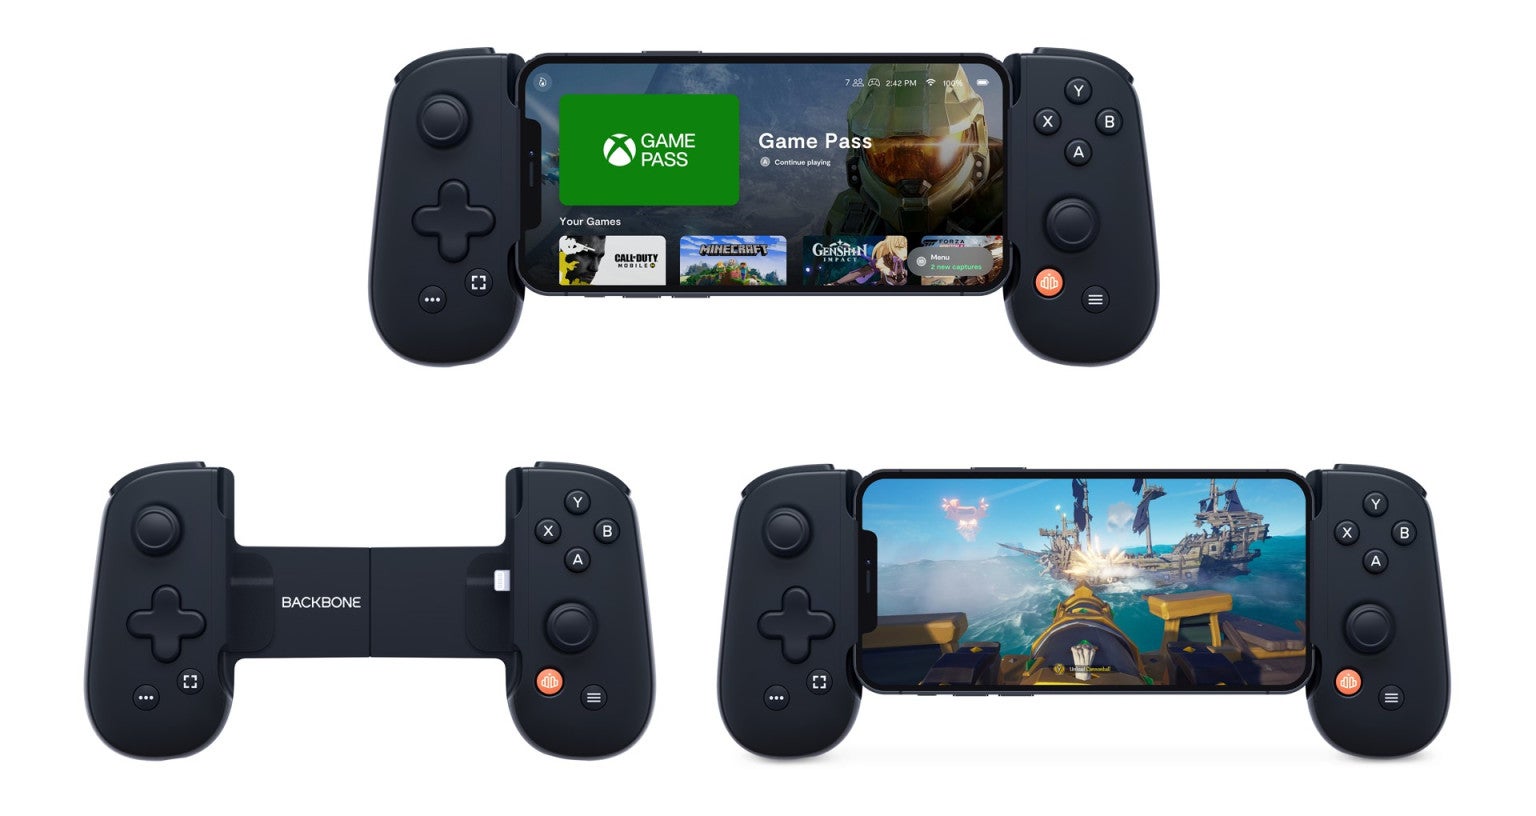 As part of Microsoft expanding Designed for Xbox platform, mobile phone controllers like the Backbone One for Xbox are now certified to work in iOS.  (Image: Microsoft)